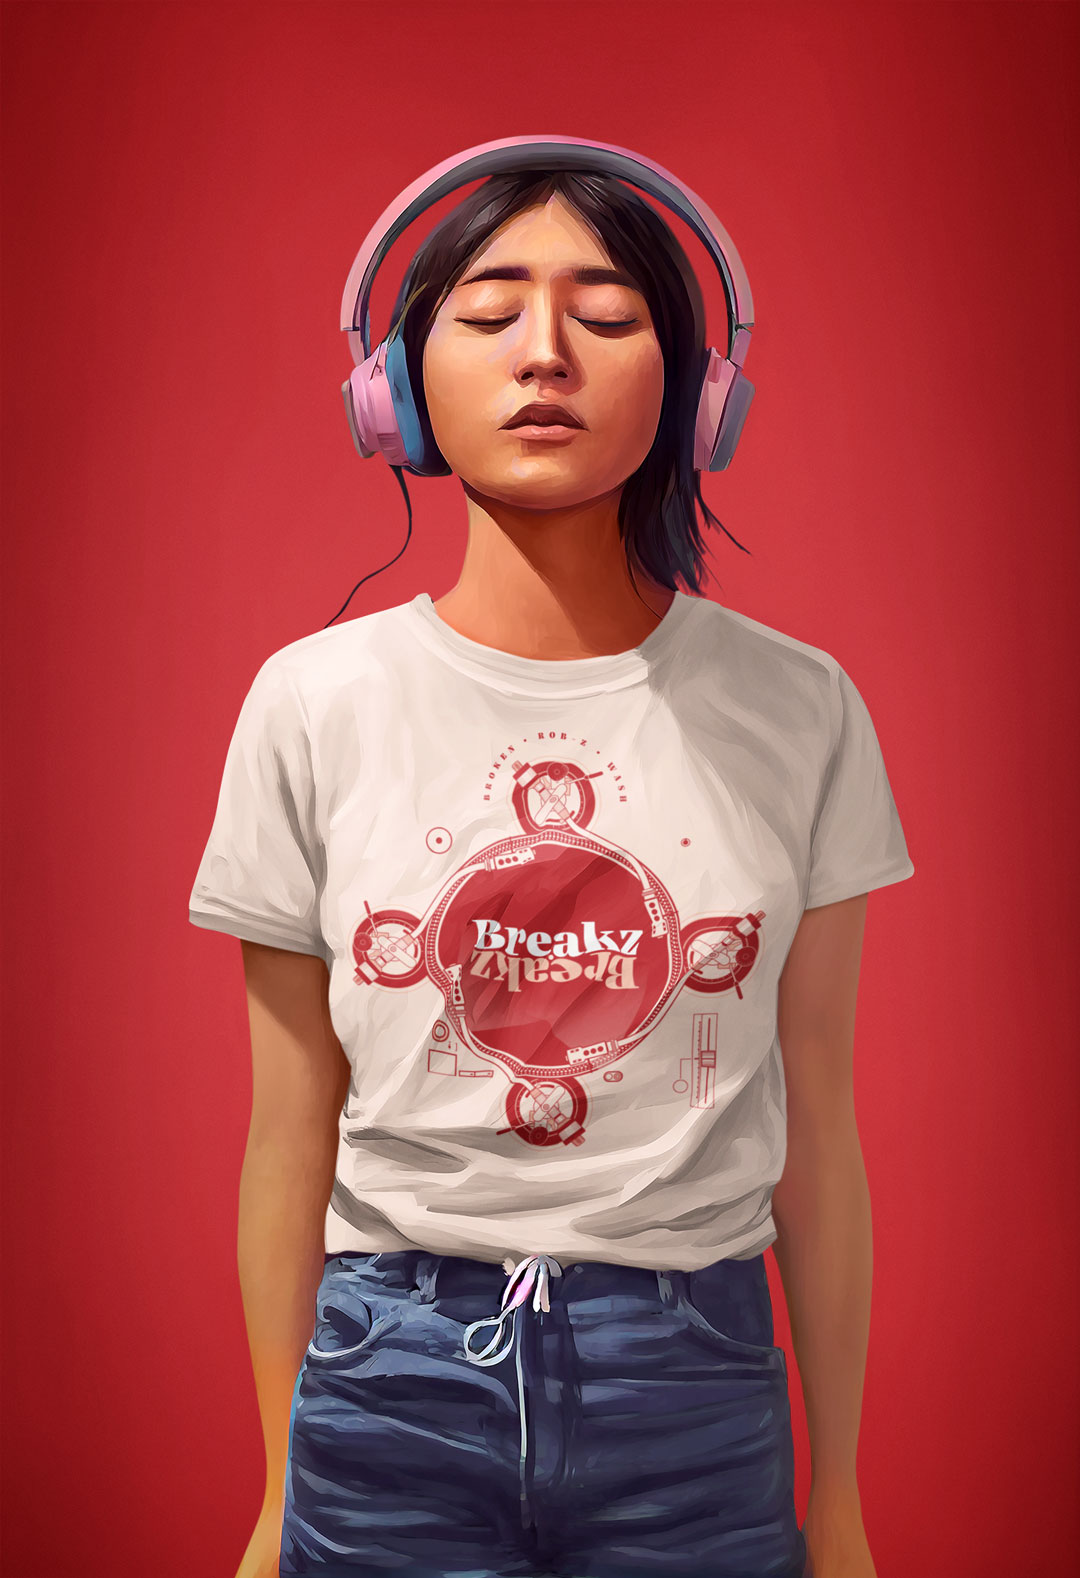 ai-generated-t-shirt-mockup-of-an-illustrated-woman-with-headphones-m31130